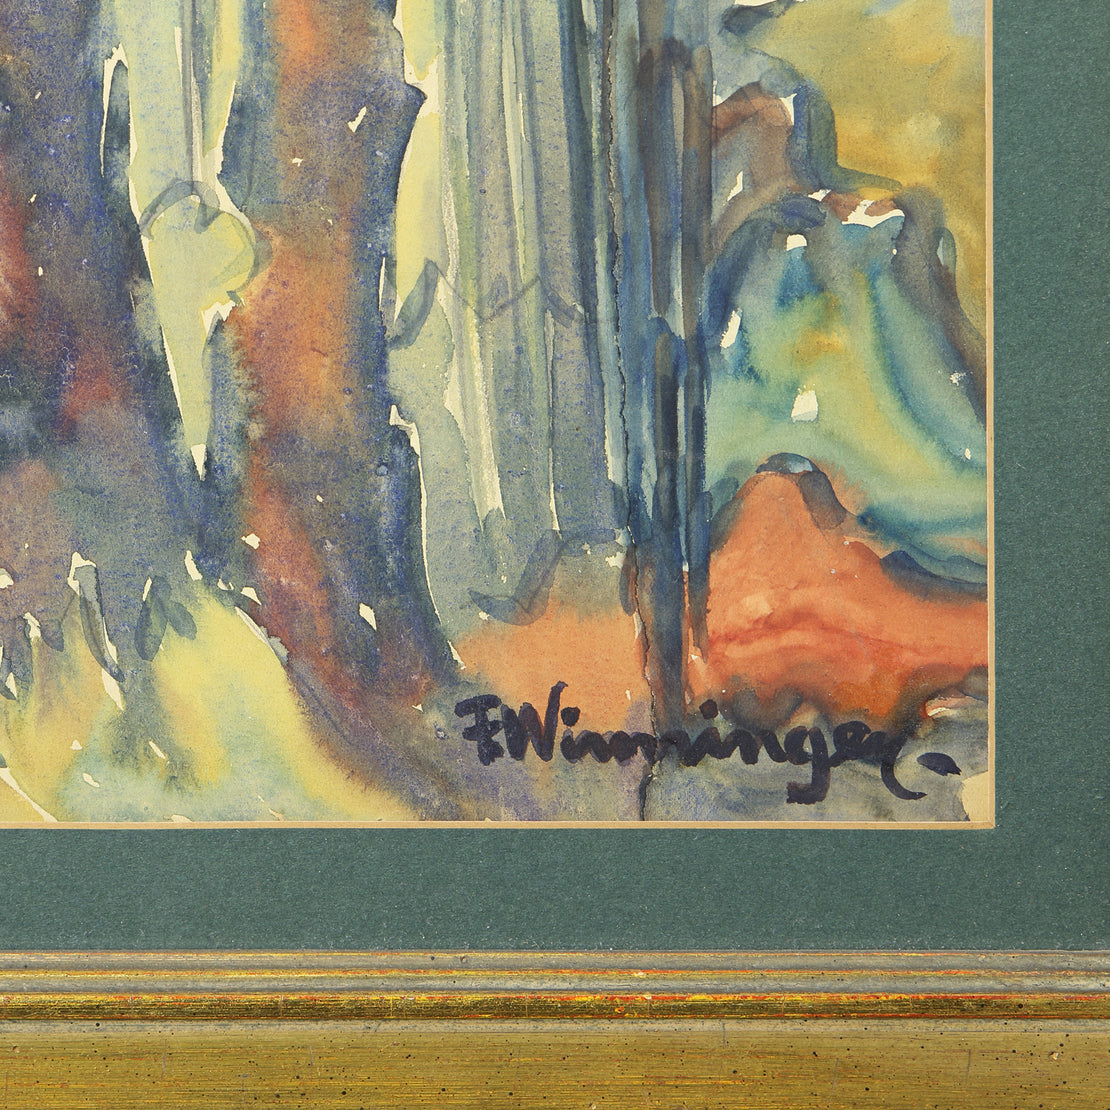 Saguaro Cactus Watercolor Painting - Franz Winniger - Vintage - STAG Provisions - W - One & Done - Art